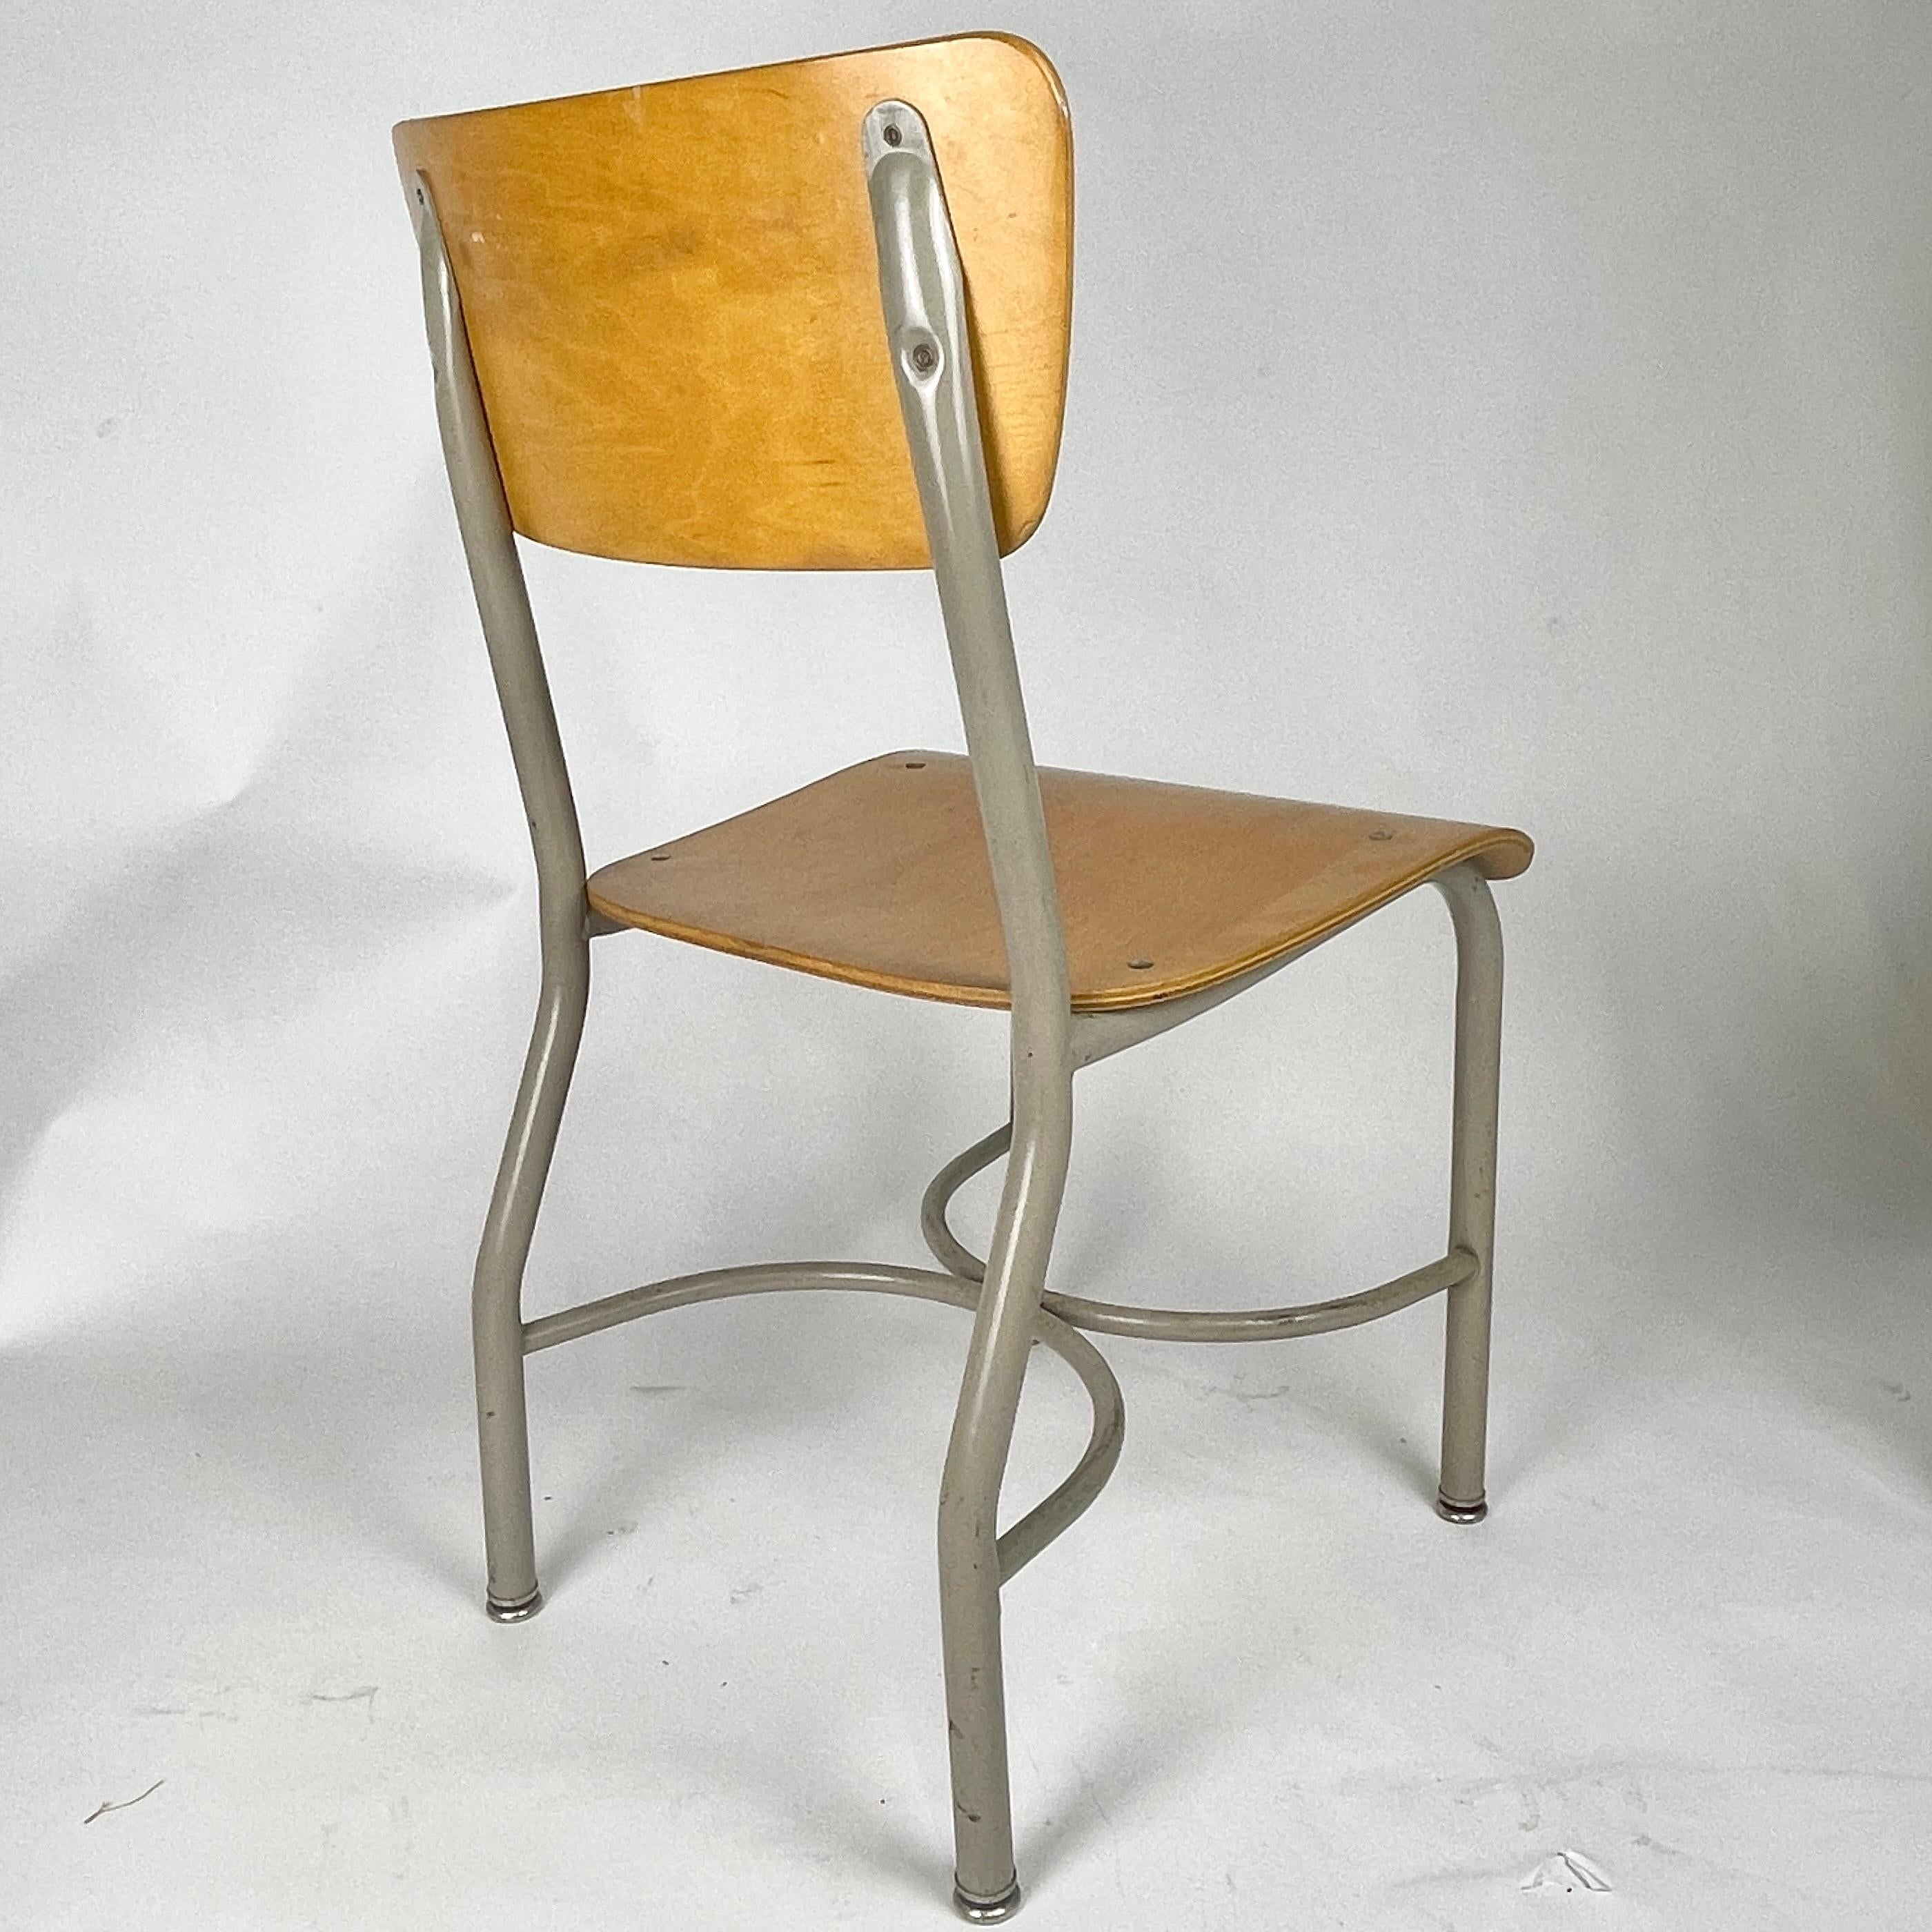 20th Century Midcentury French Style Grey & Birch Plywood School or Cafe Chairs -35 Available For Sale